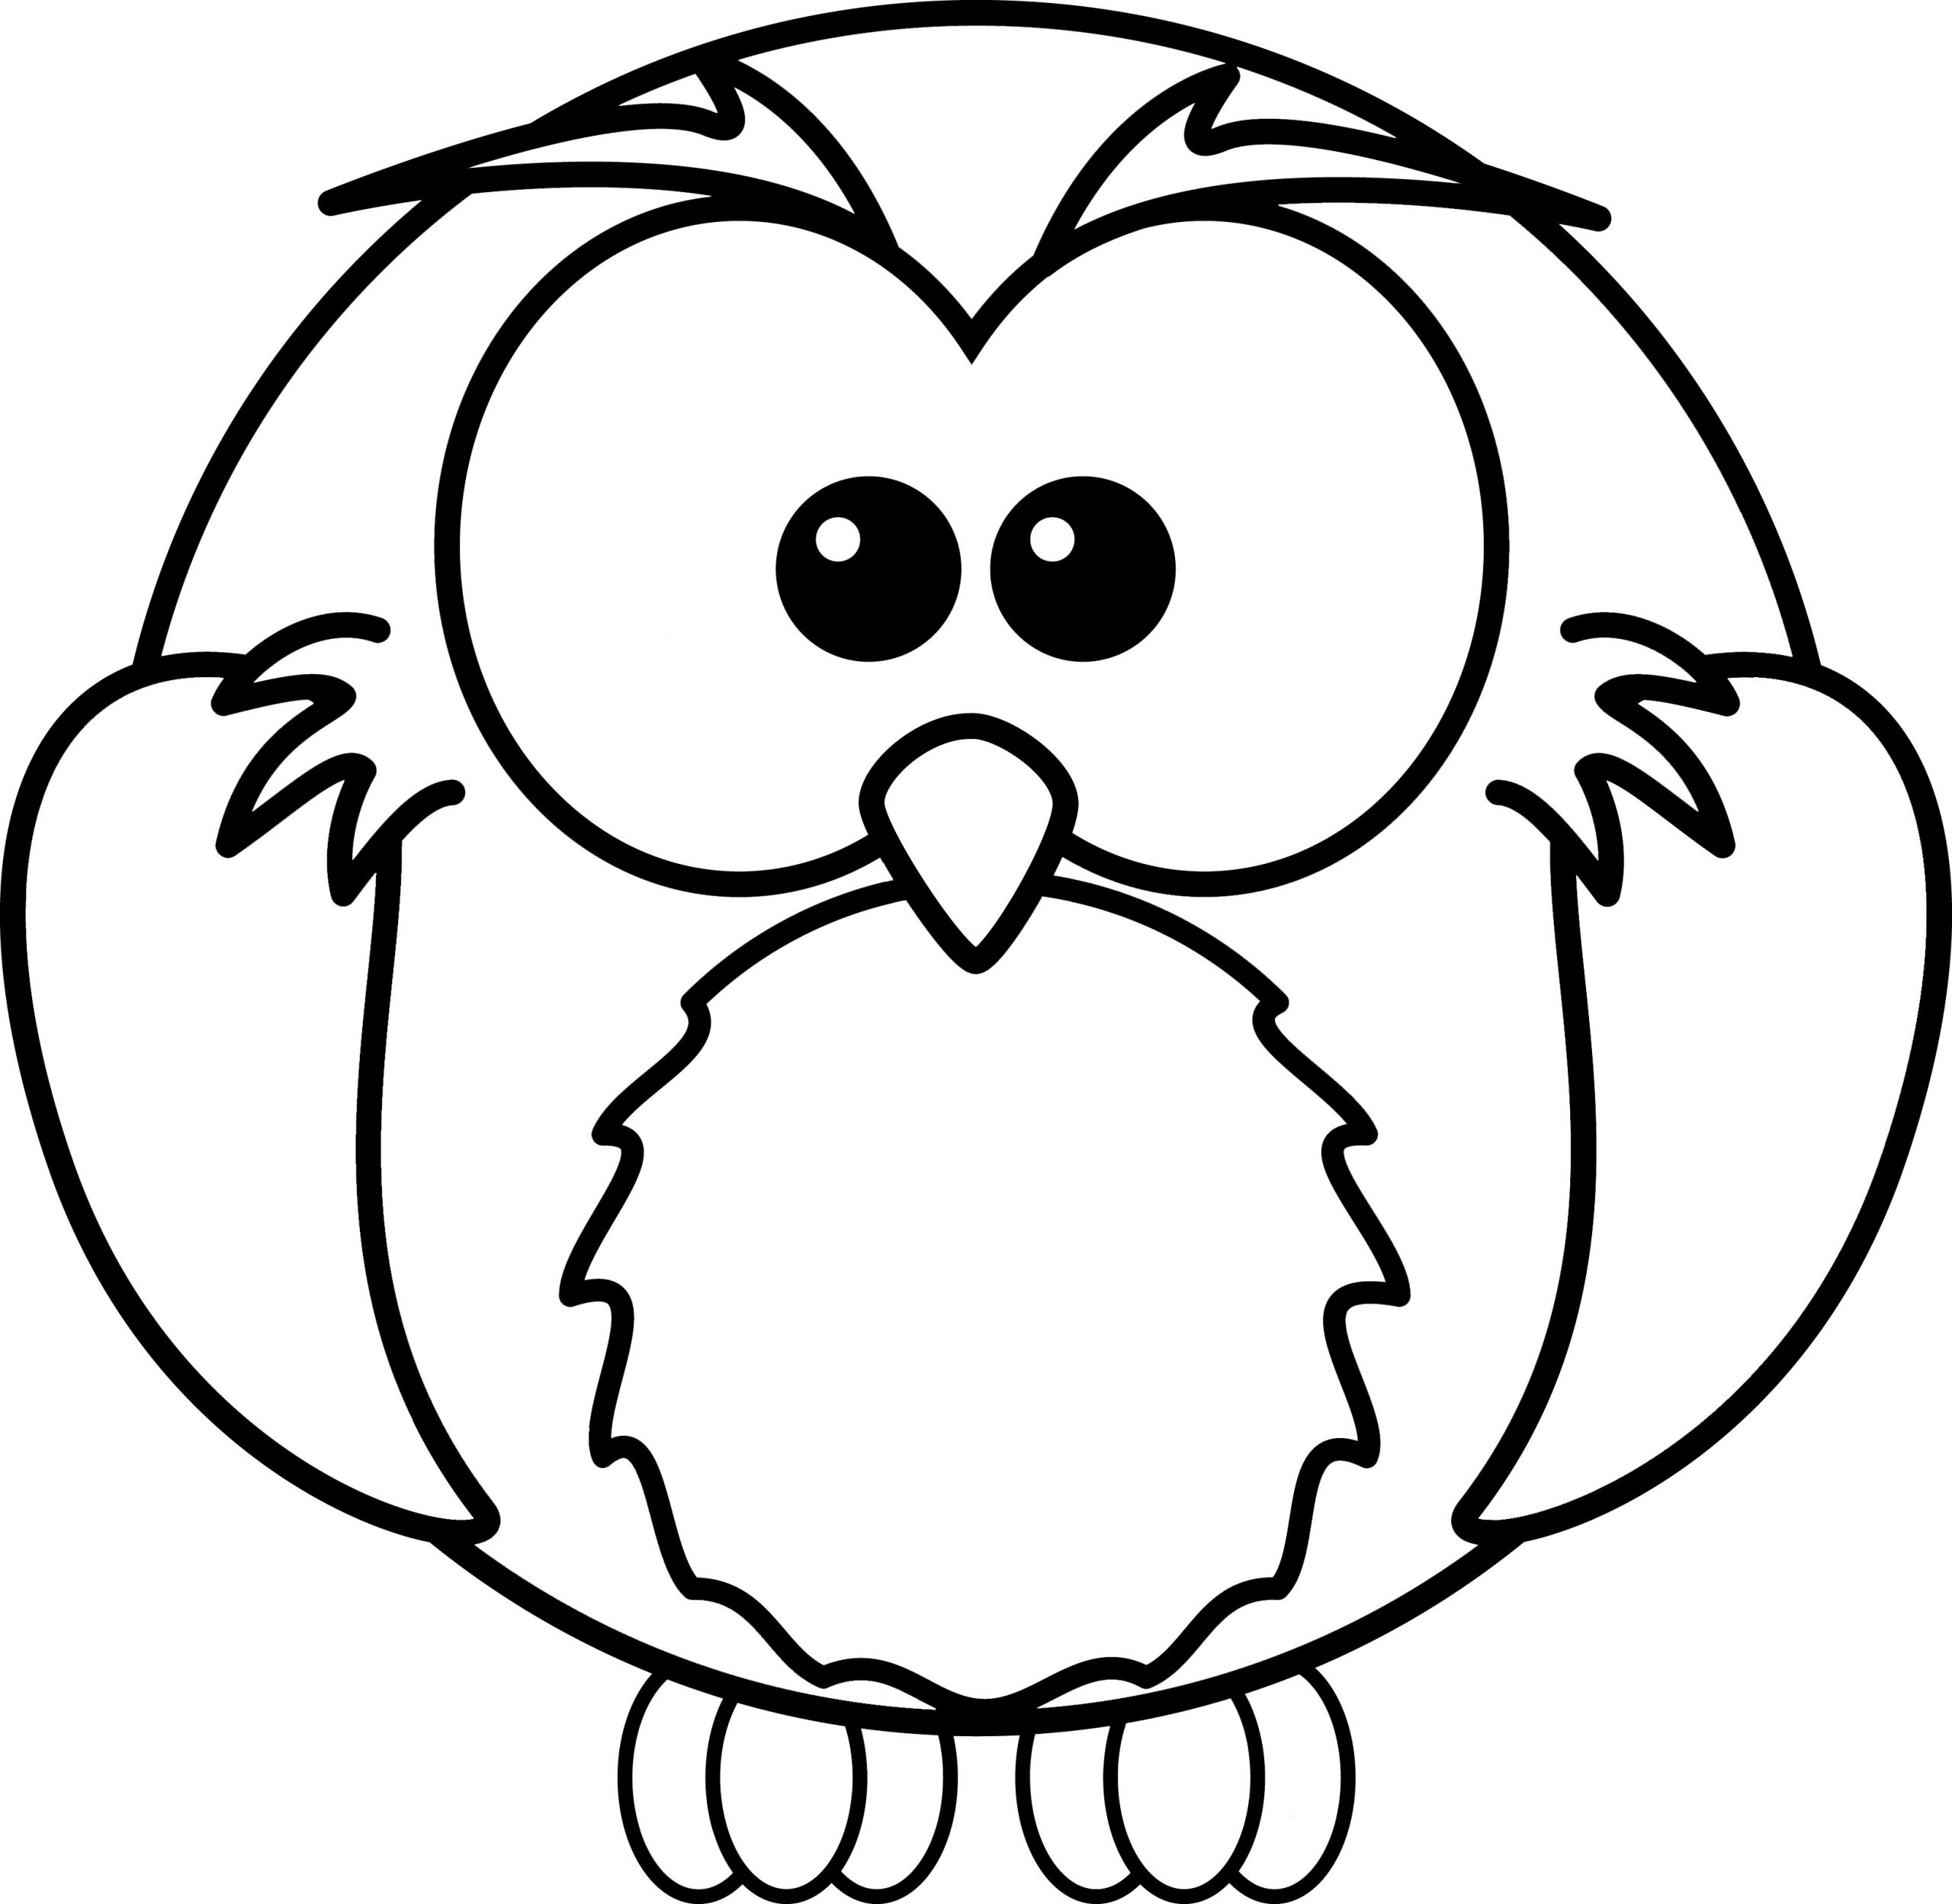 Owl Coloring Pages For Kids
 Eternally 28 Night owling